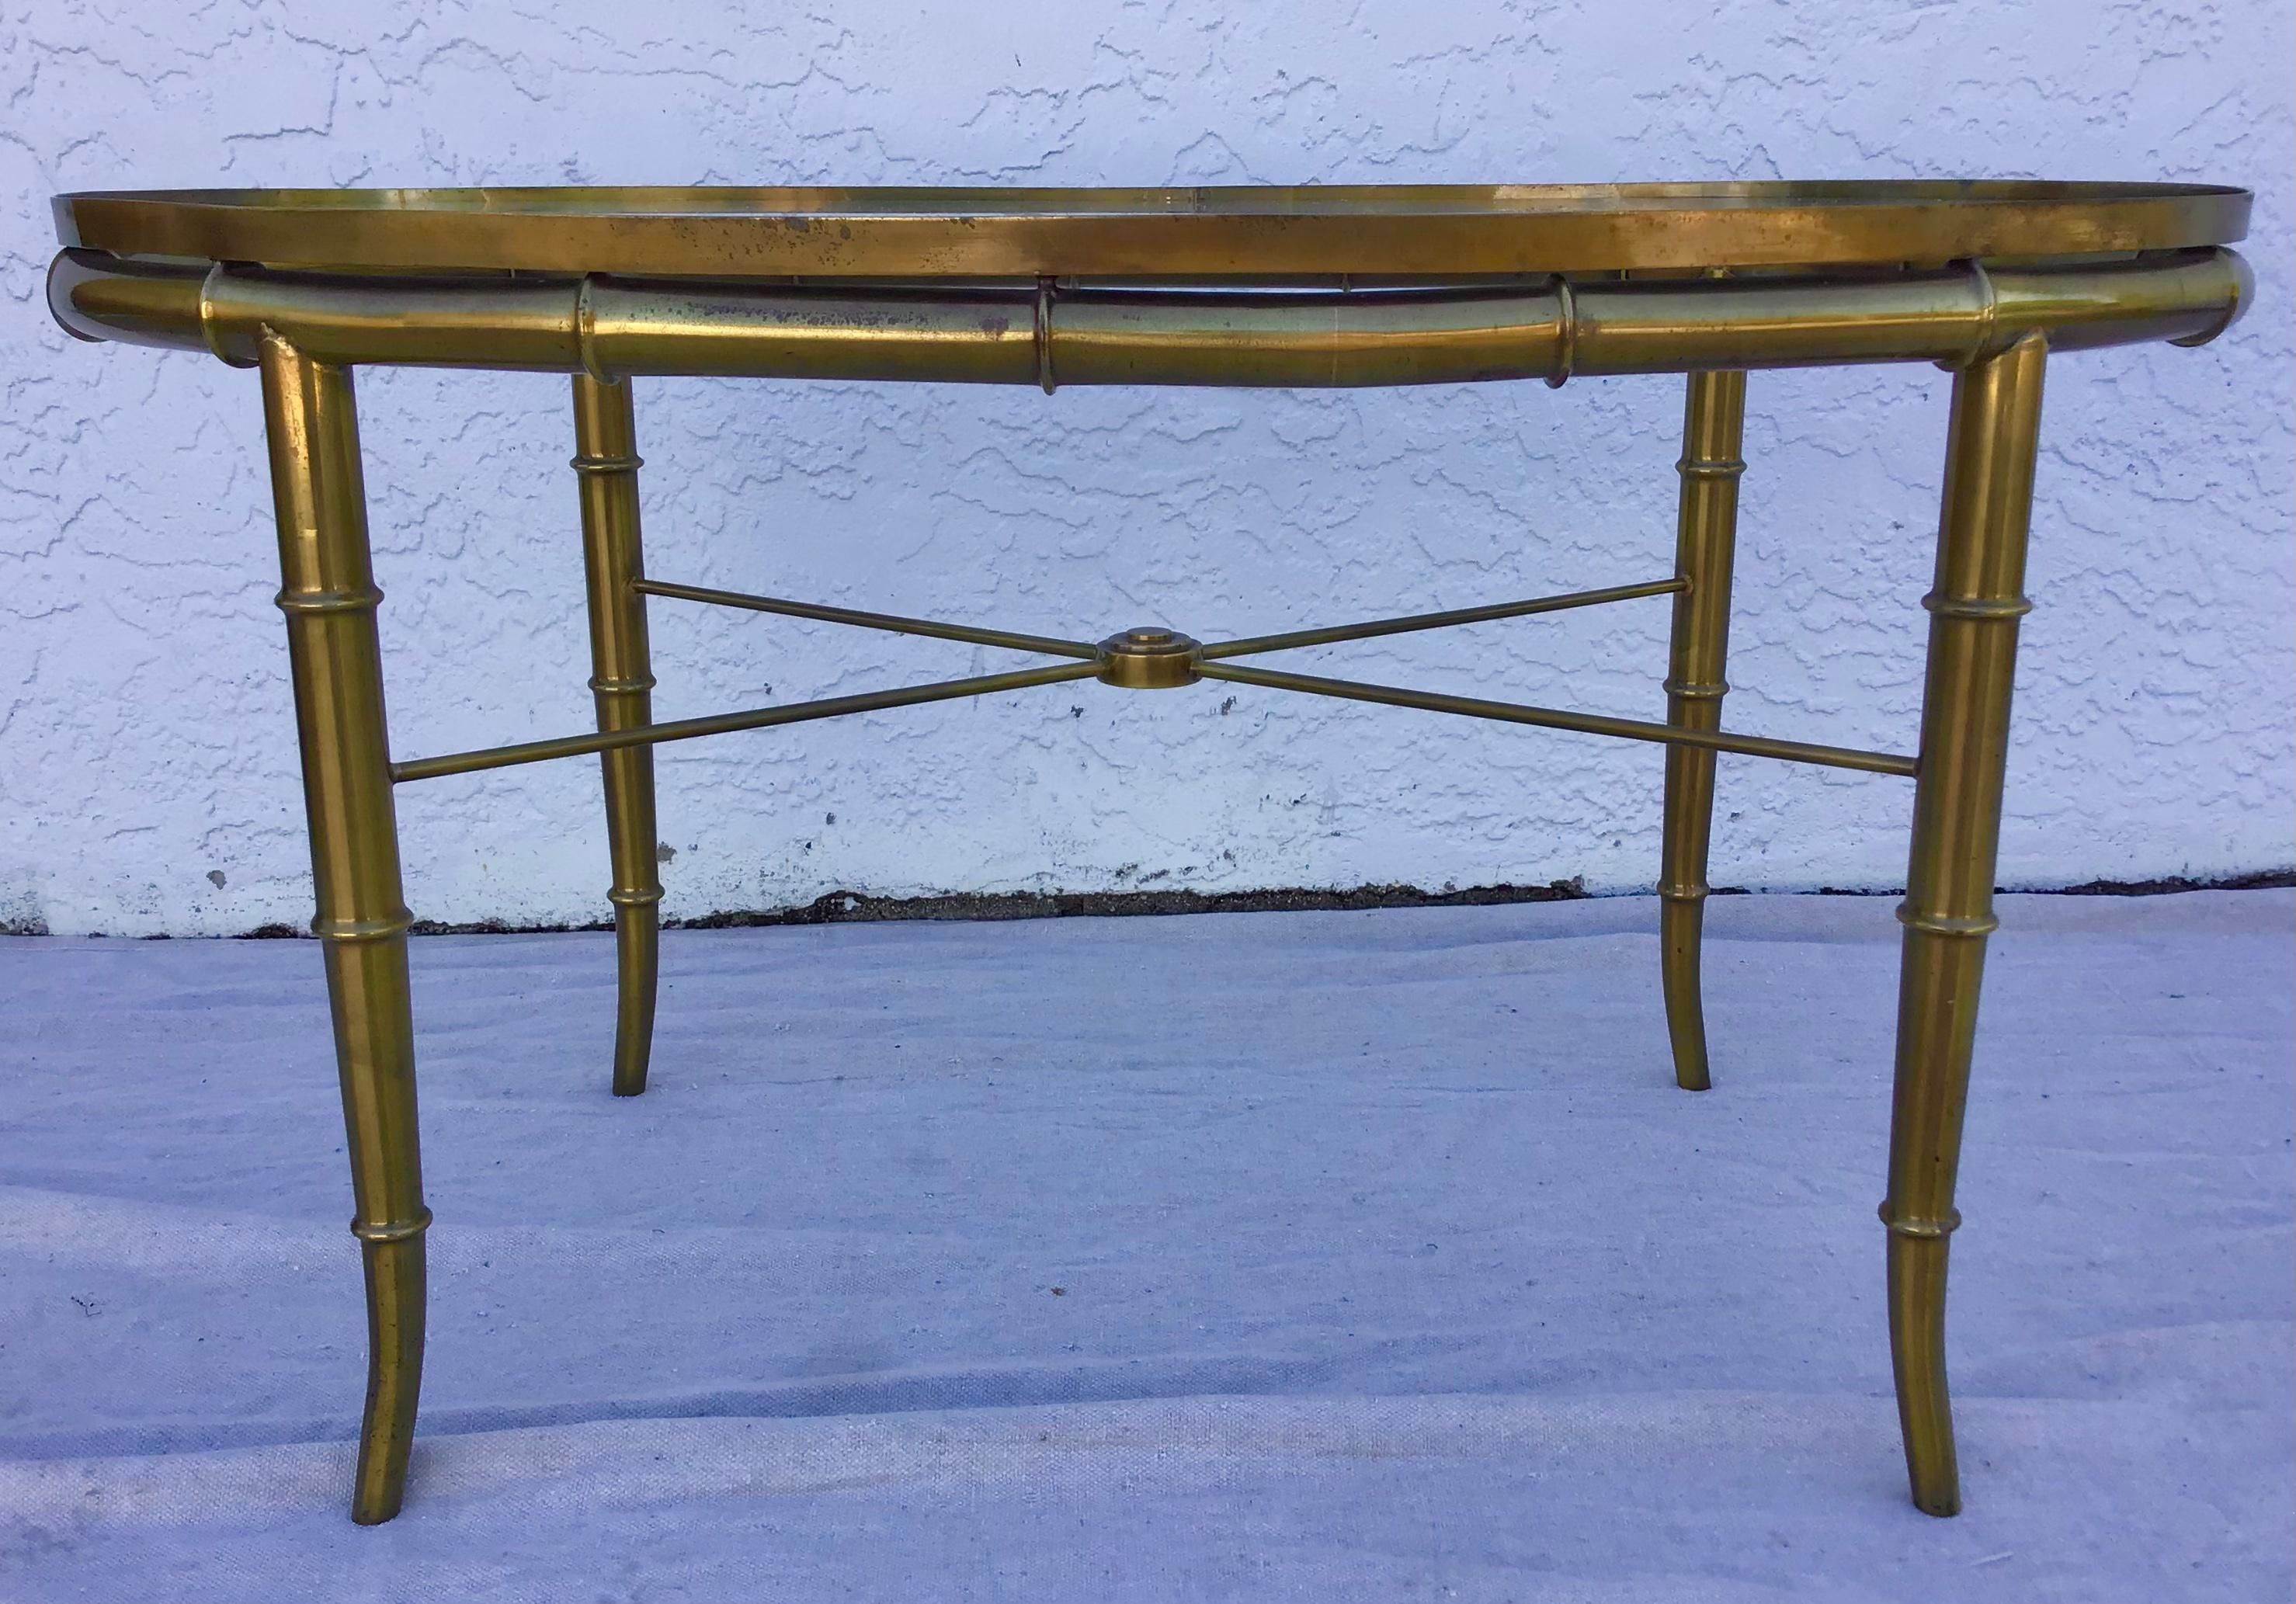 A gorgeous Hollywood Regency cocktail table or side table by Mastercraft. The table features a stunning faux bamboo brass frame and glass top. The brass shows beautiful patina from age and use. Overall the table is in very good original vintage